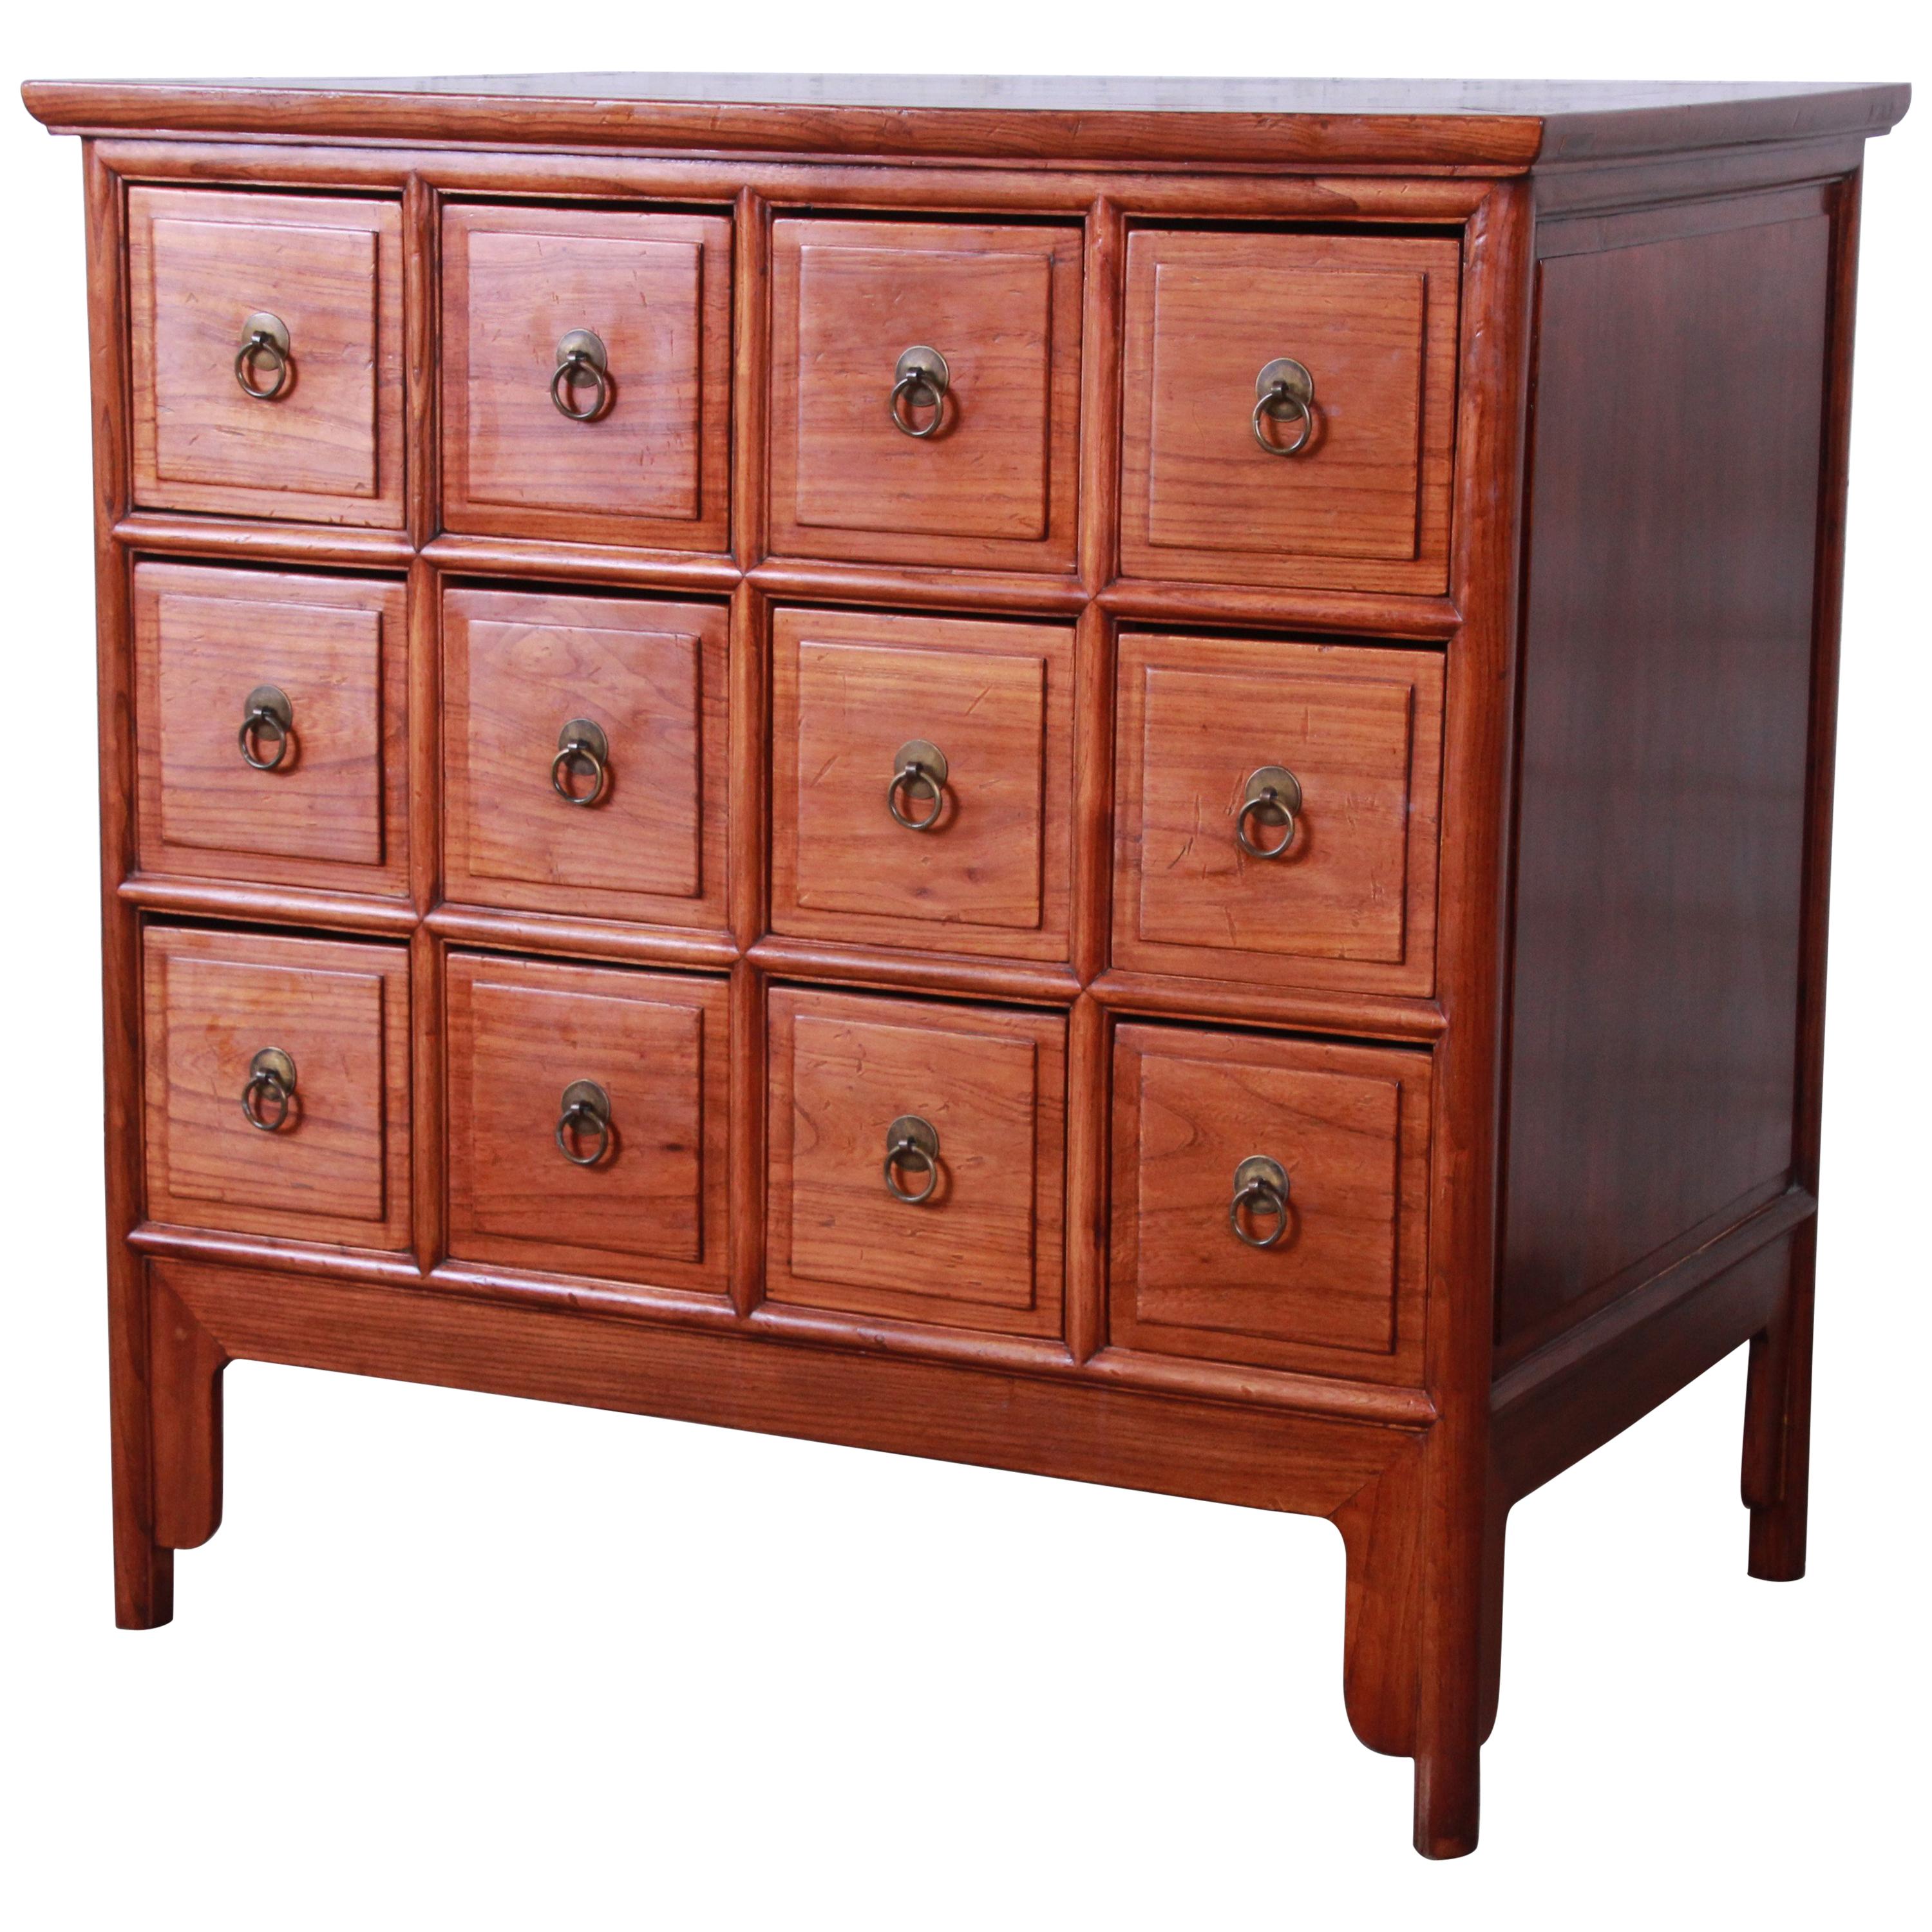 Midcentury Chinese Twelve-Drawer Elm Wood Apothecary Cabinet